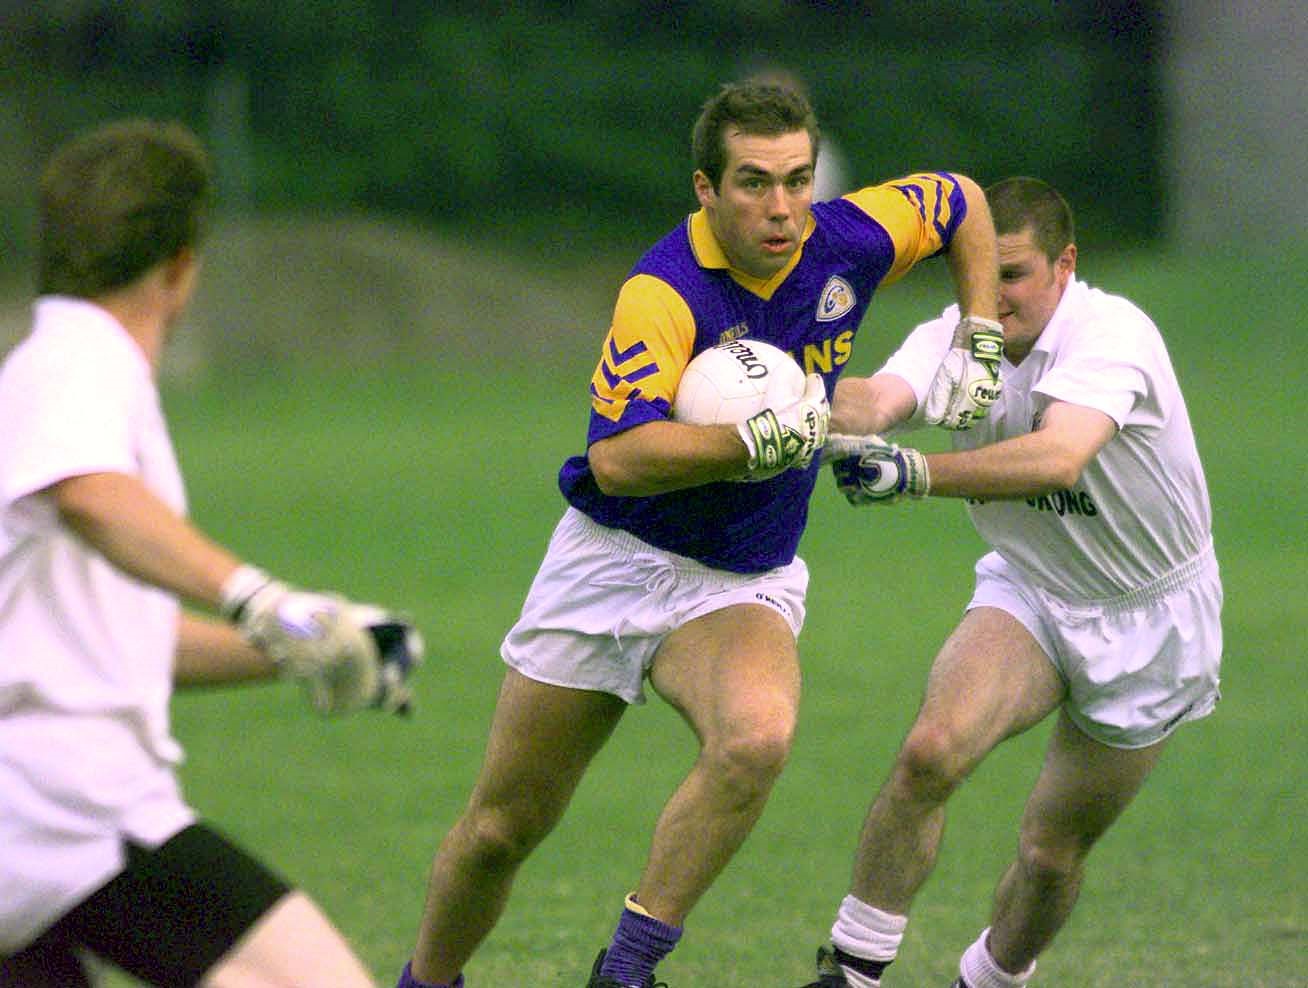 A youthful Colin Miller on the rampage for Annanough against Courtwood in 2000